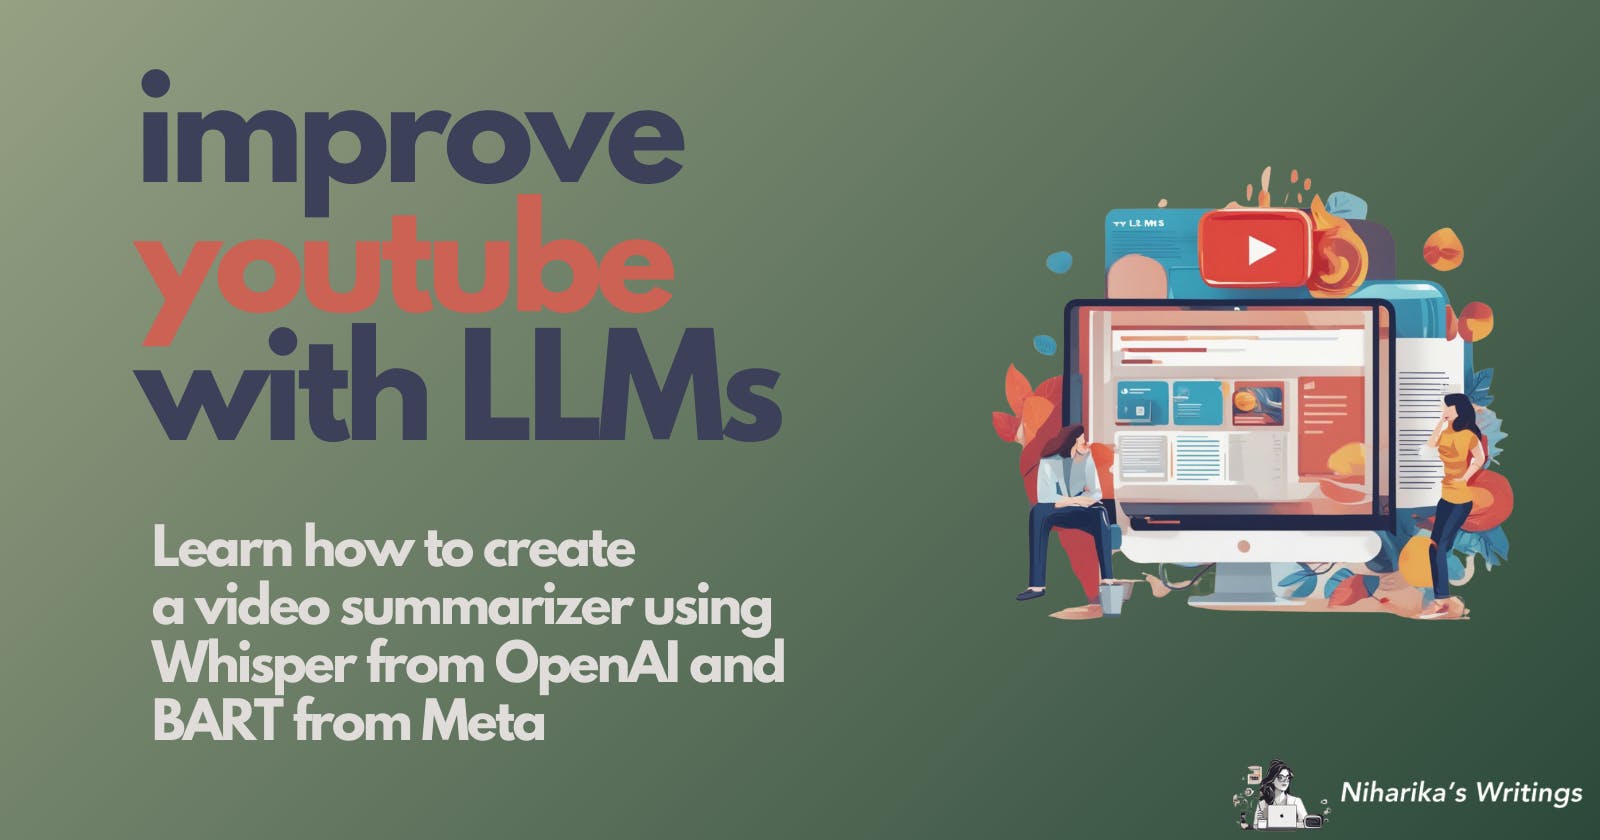 How to Improve YouTube with LLMs